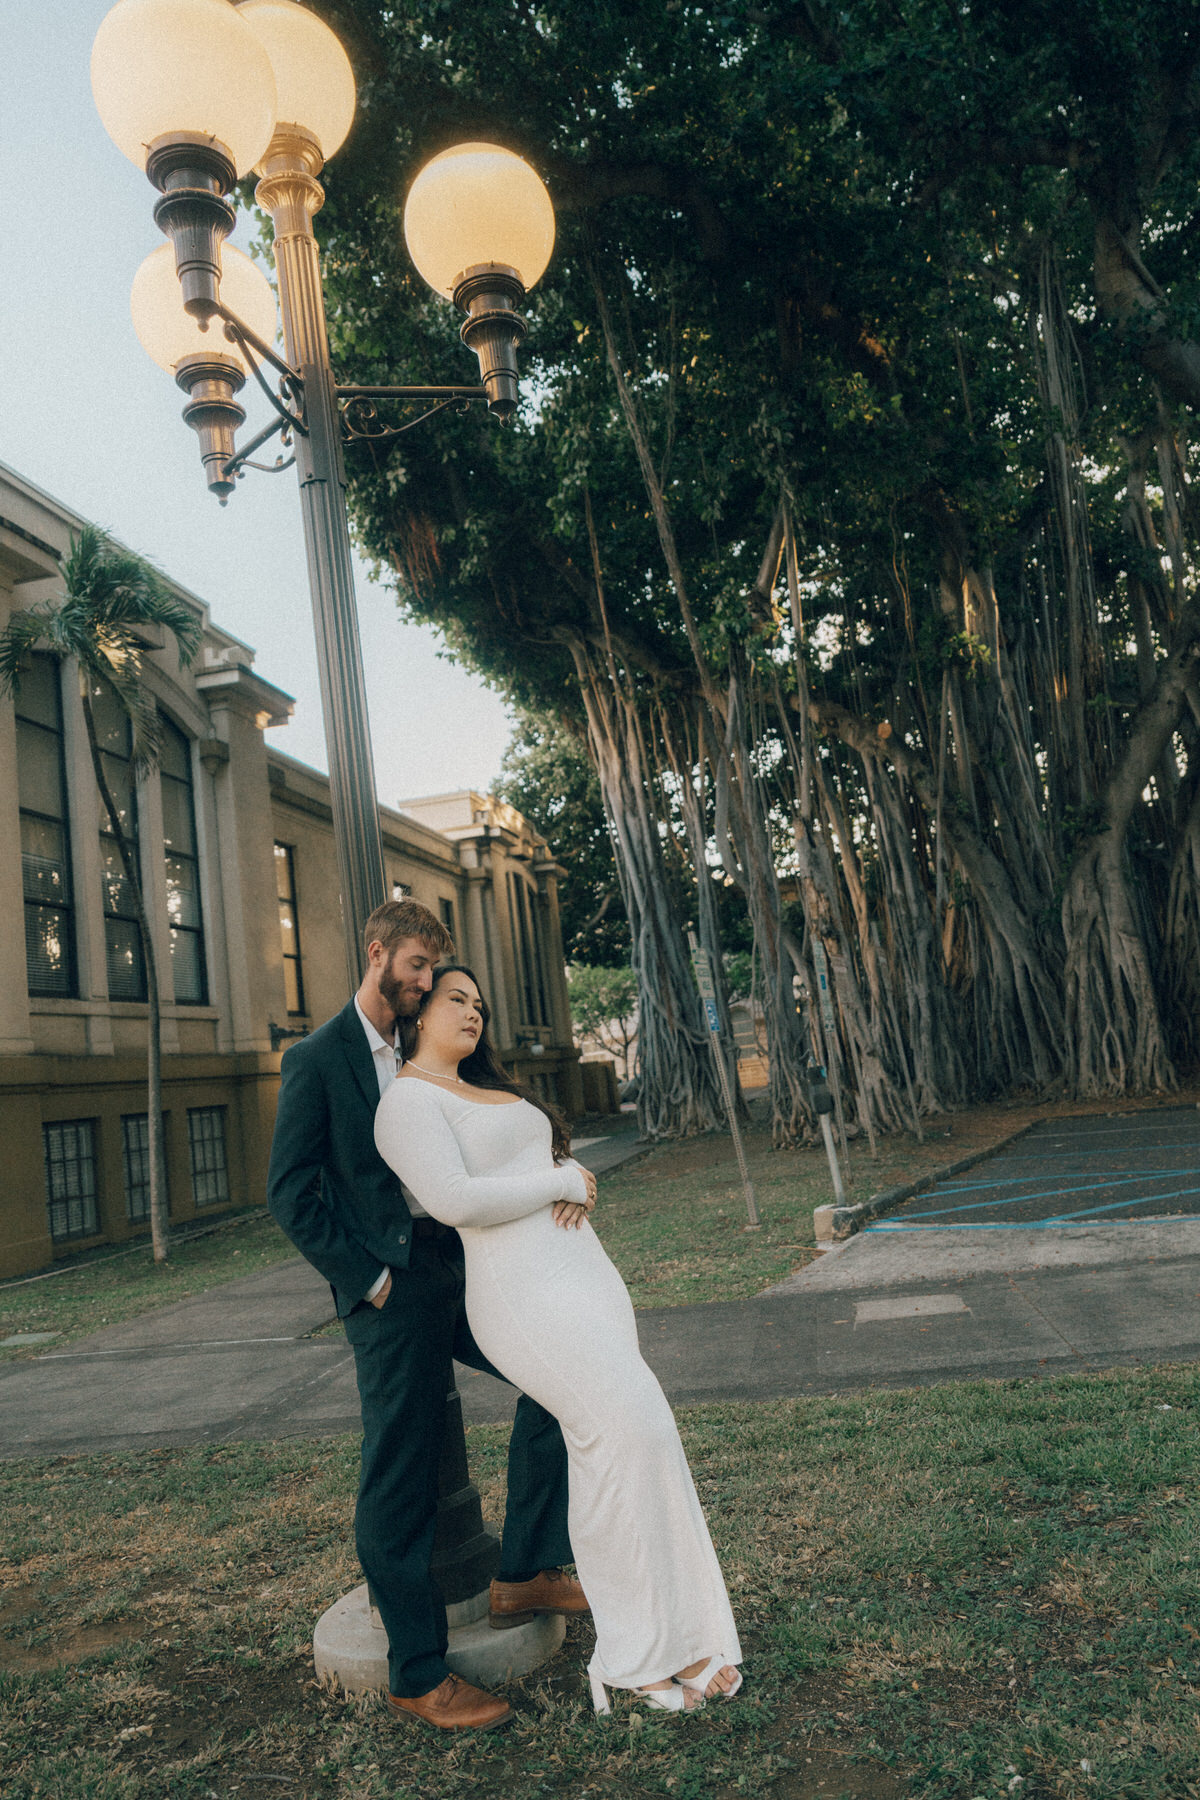 A young couple wearing stylish clothes leans on a light pole during their engagement session.